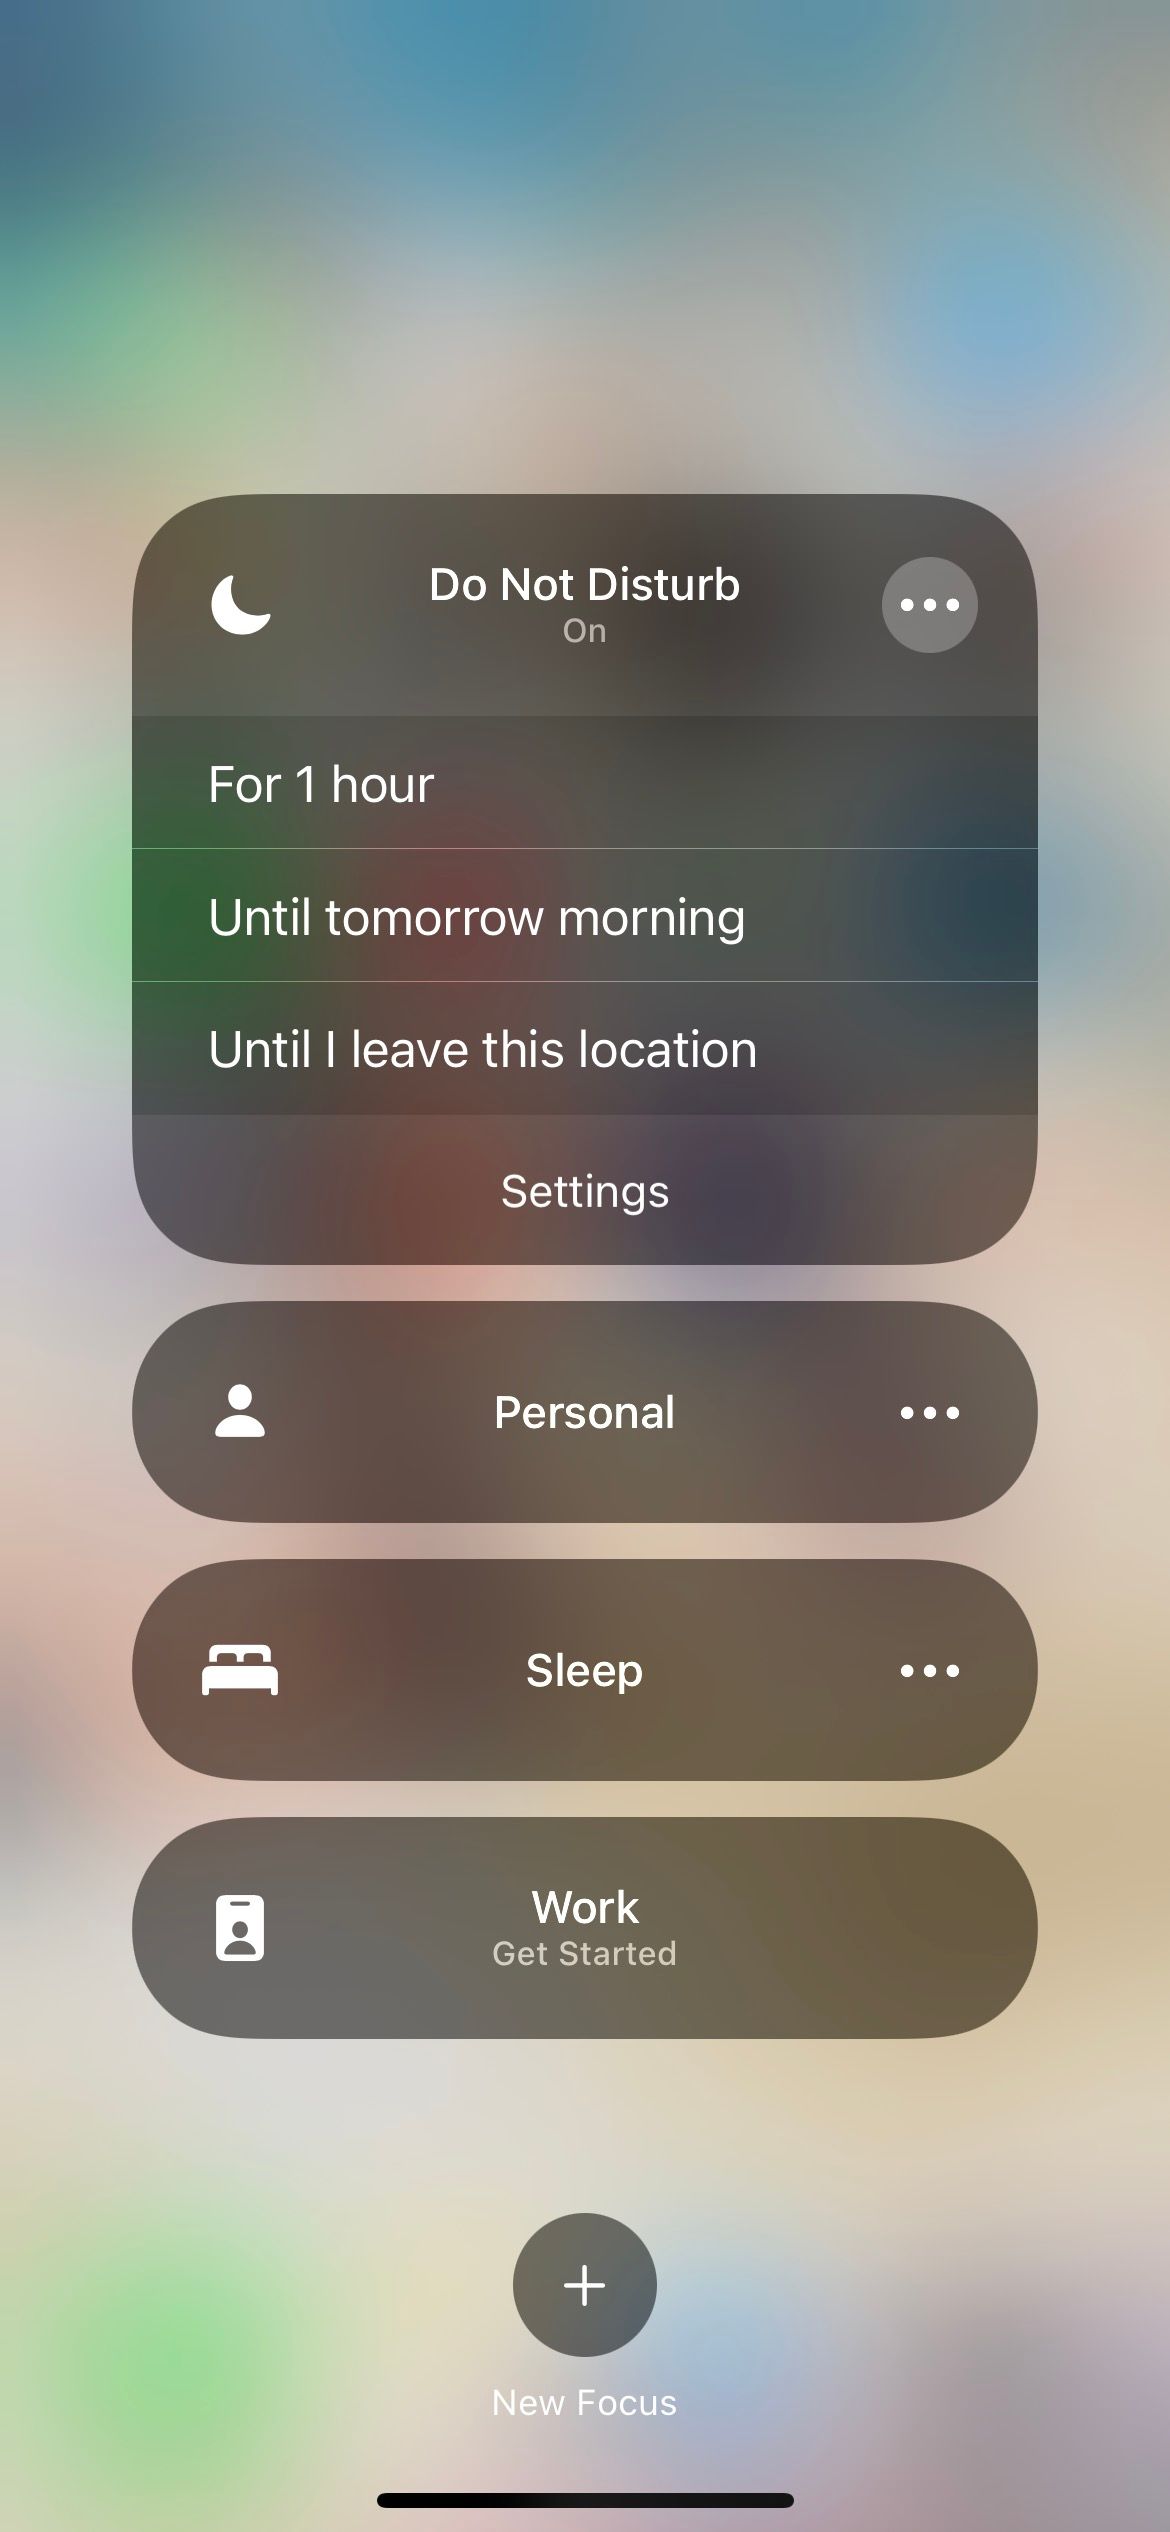 How to Enable Do Not Disturb on iPhone